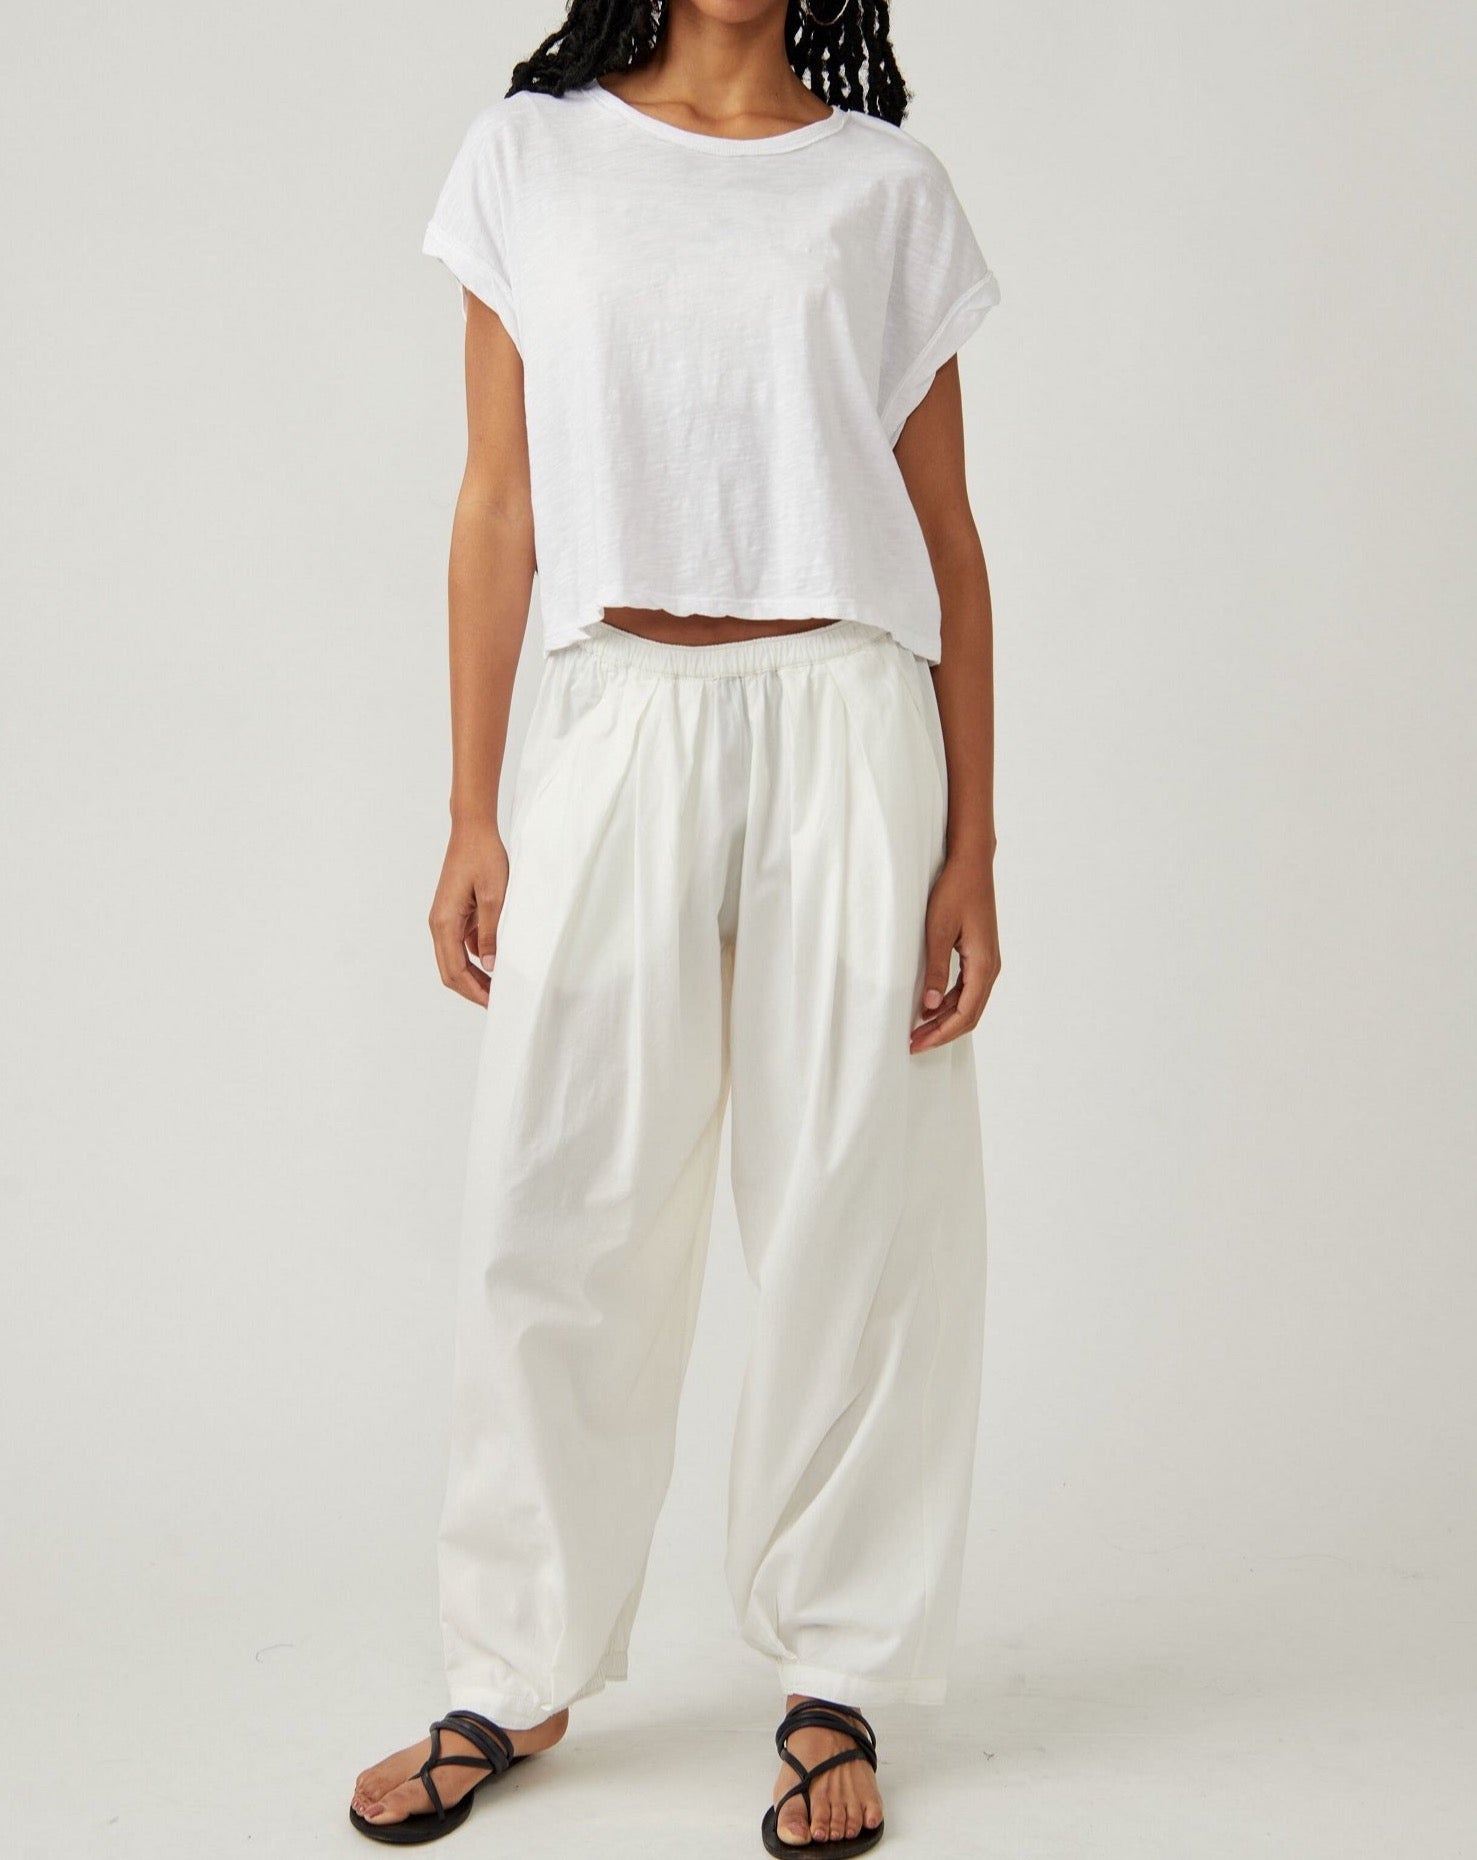 To The Sky Parachute Pant Free People